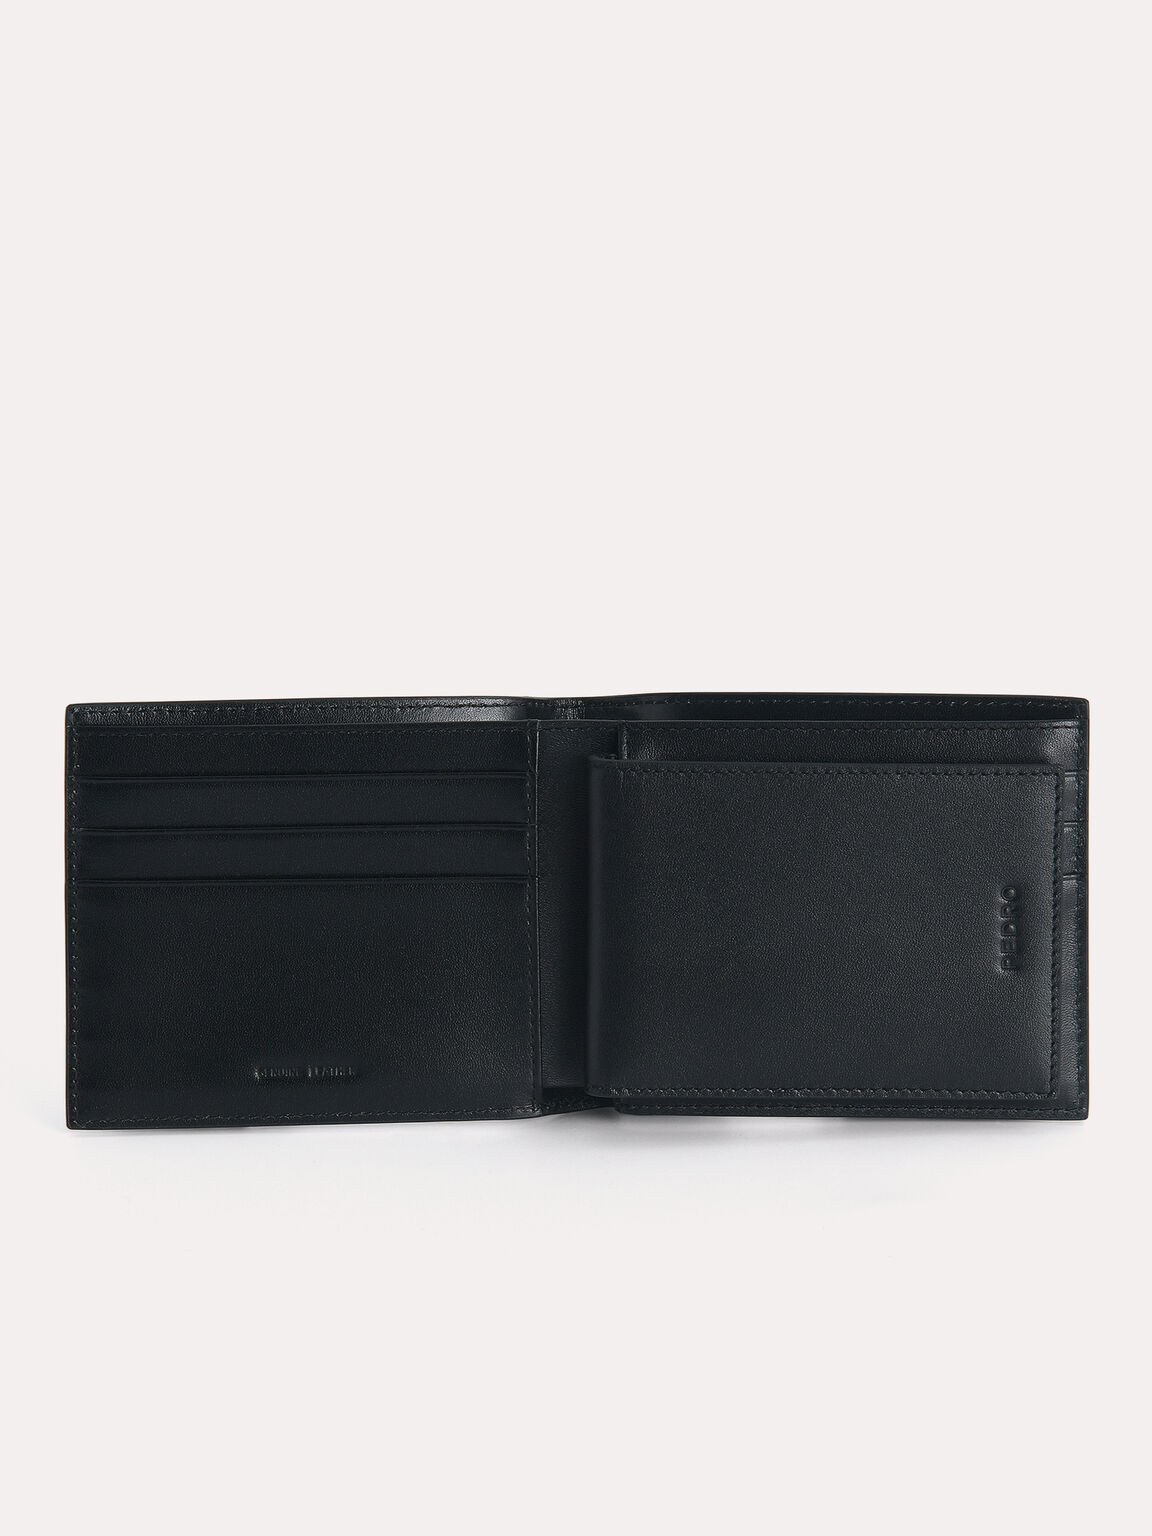 Textured Leather Bi-Fold Wallet with Insert, Black